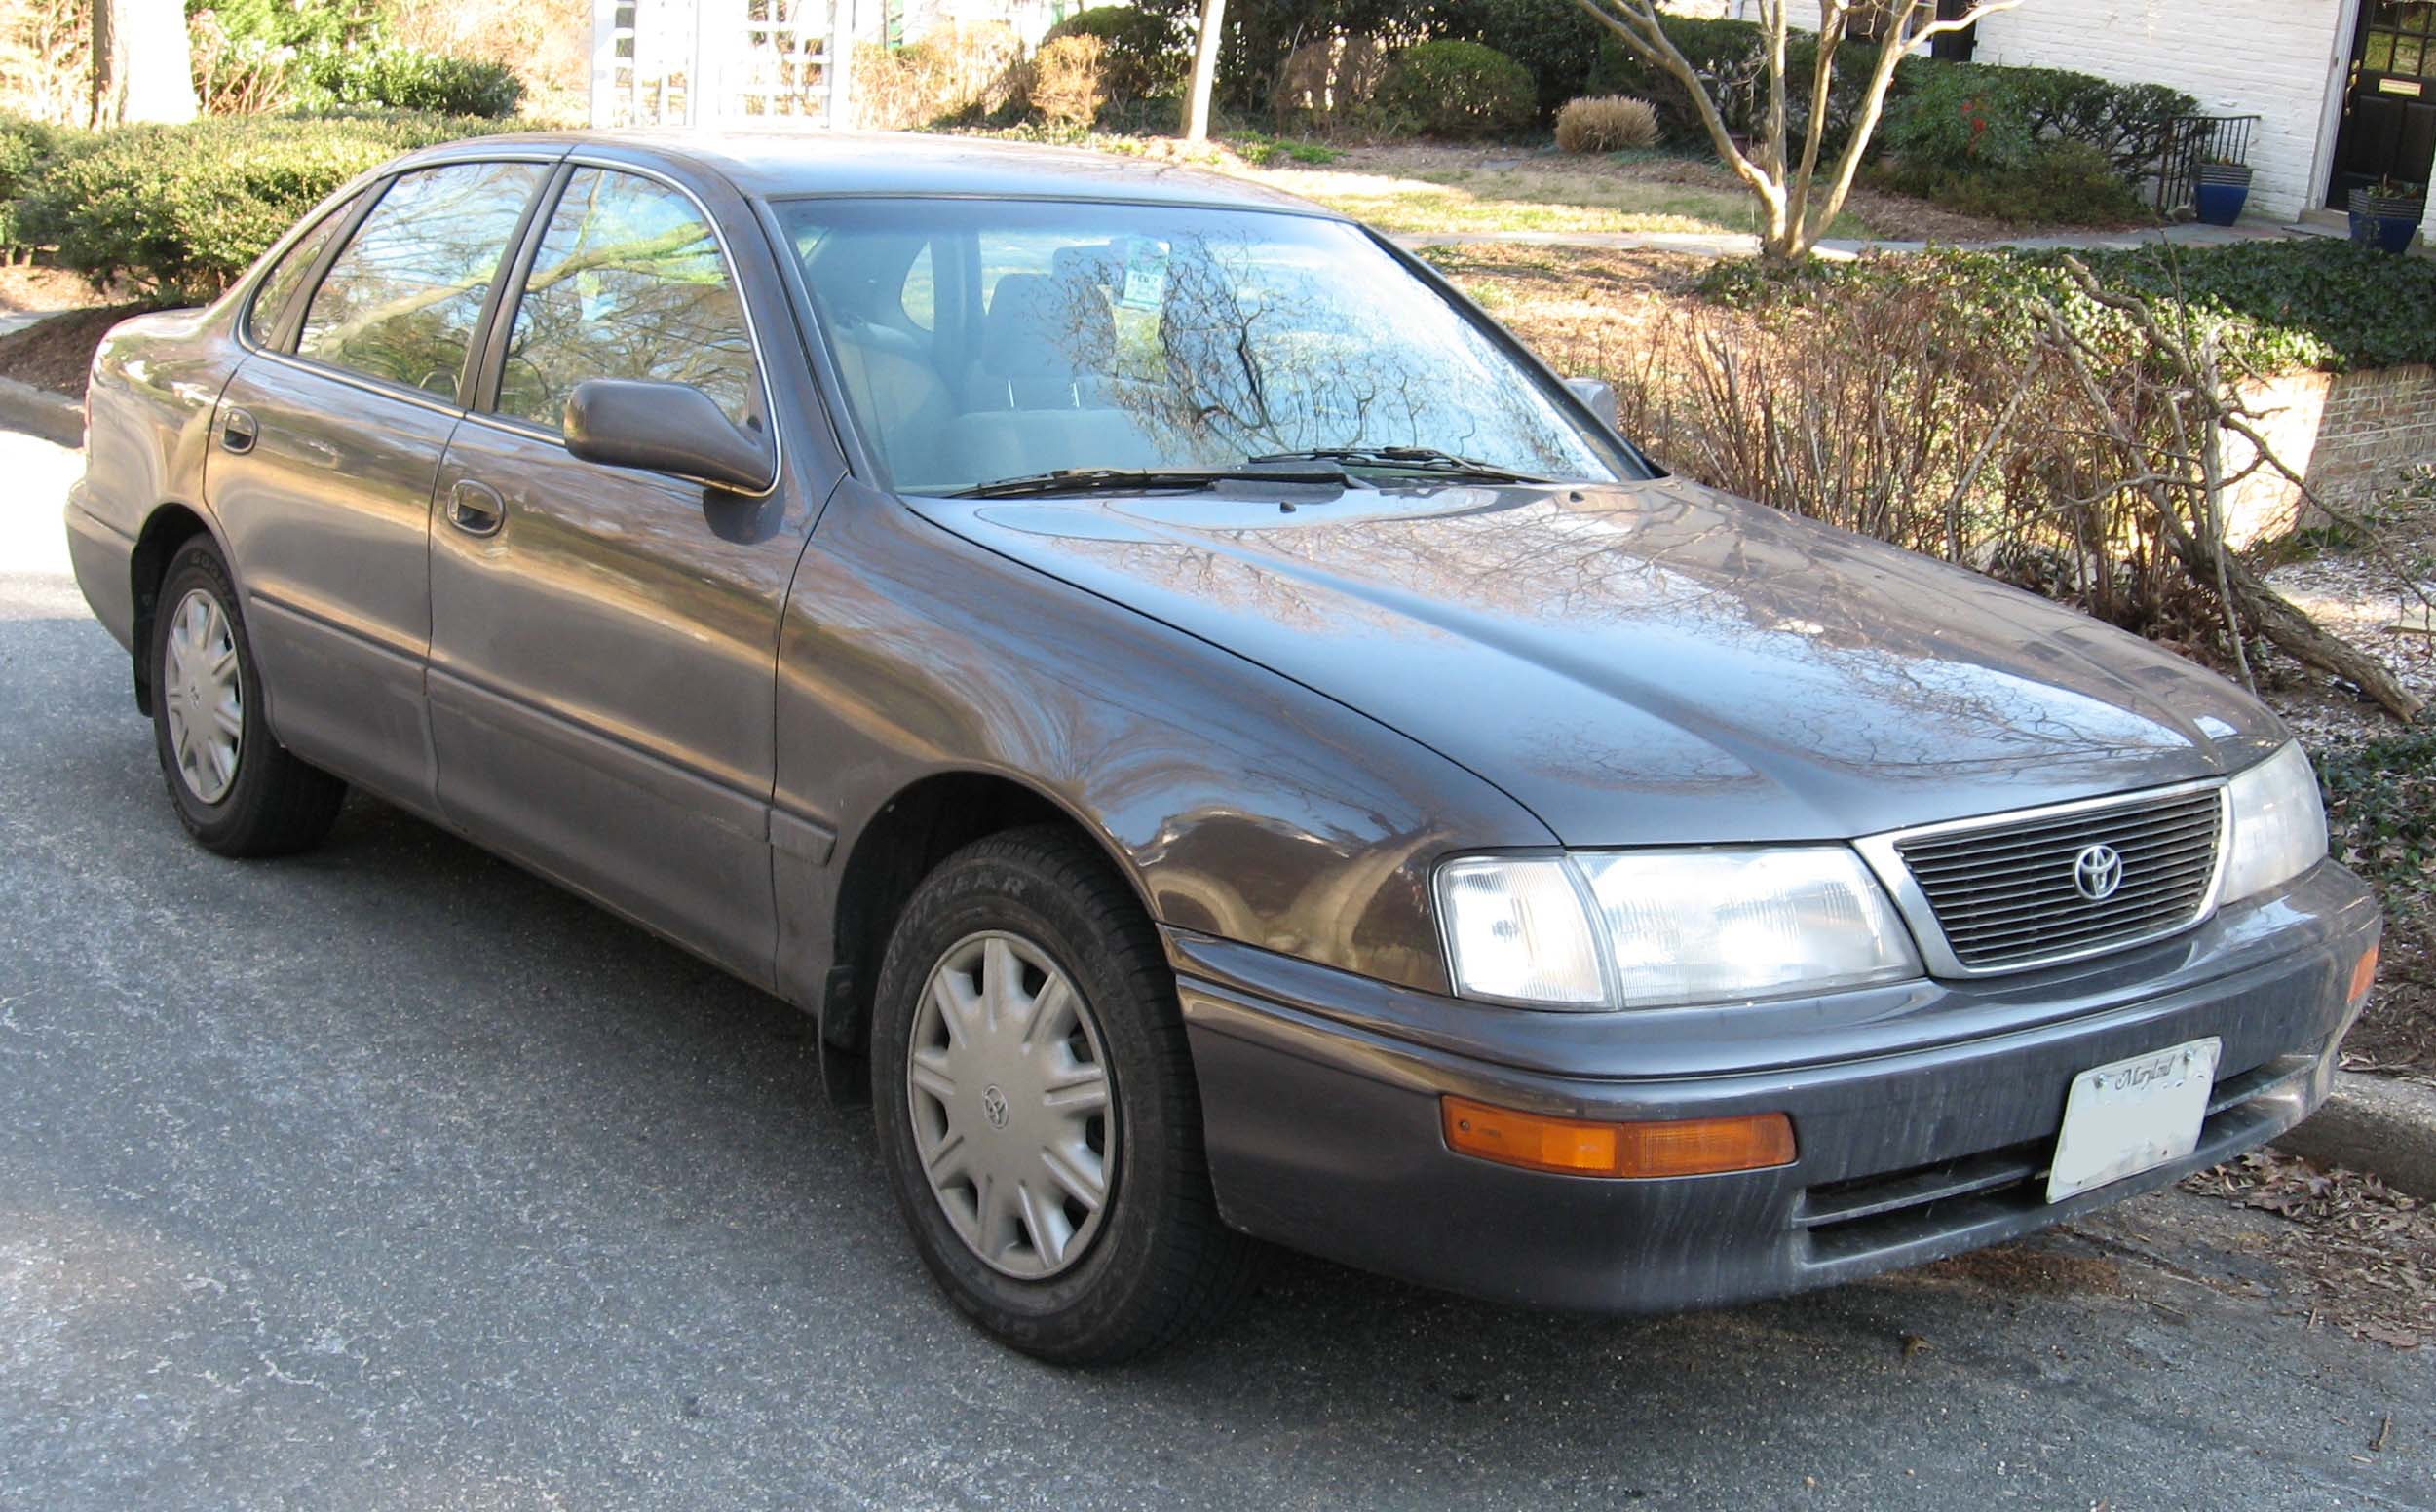 dimensions of a 1995 toyota avalon #5